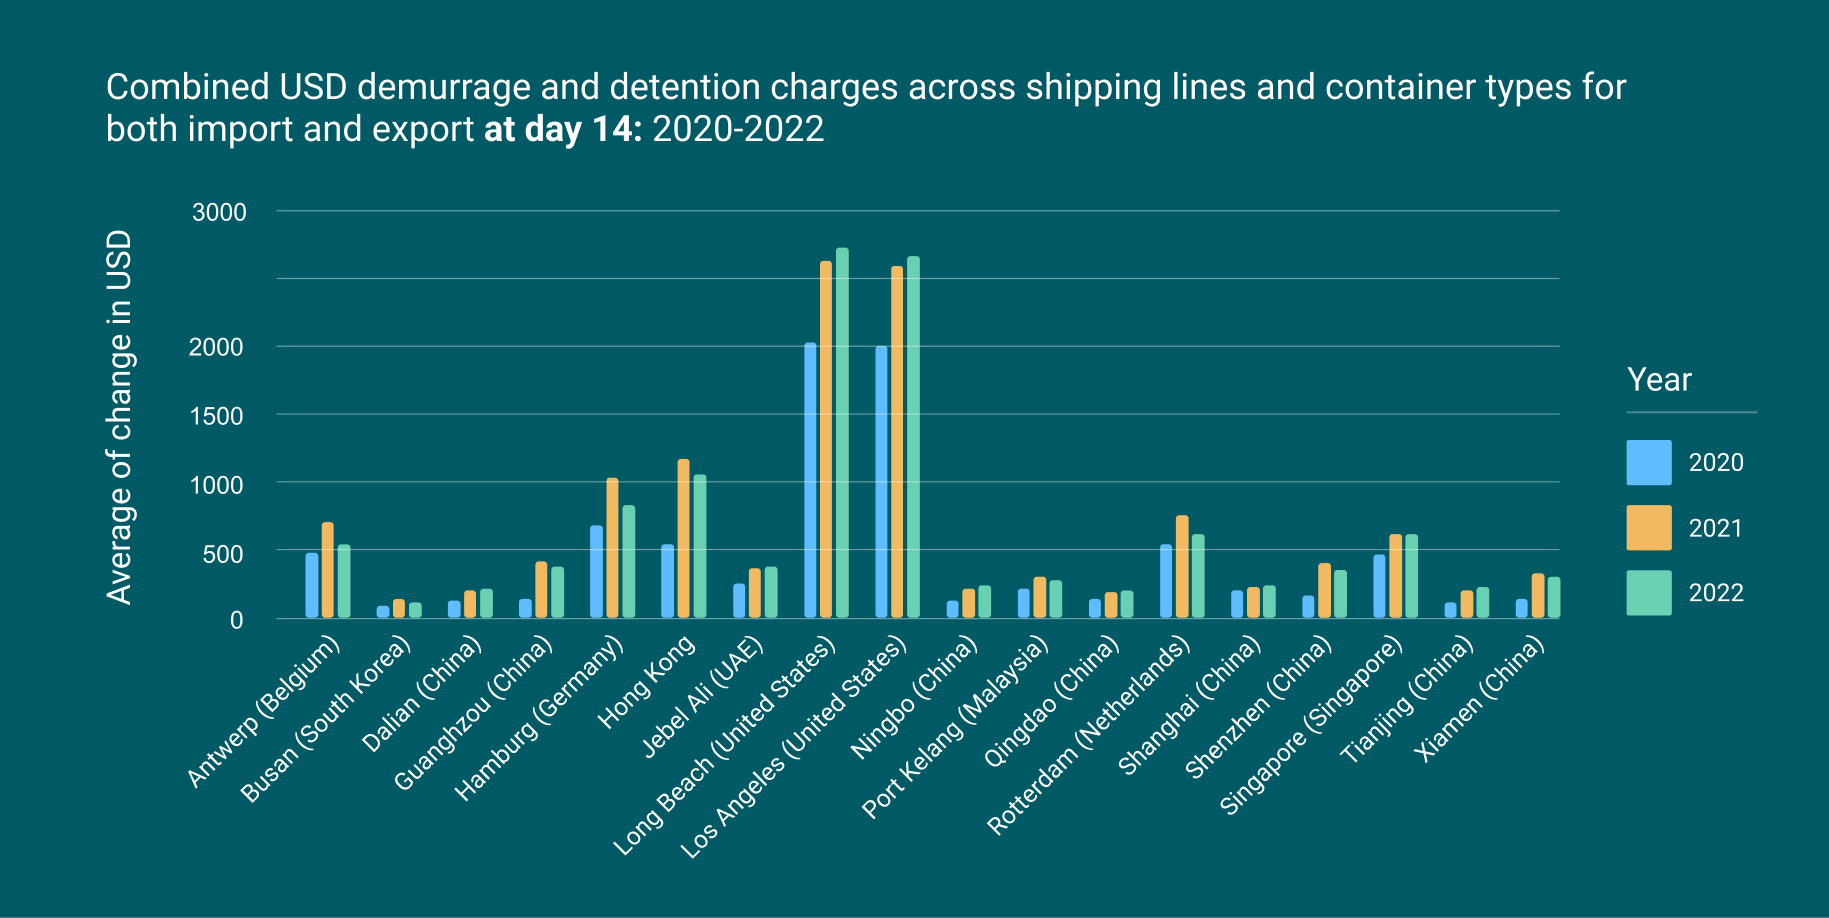 Demurrage and detention charges from 2020 to 2022